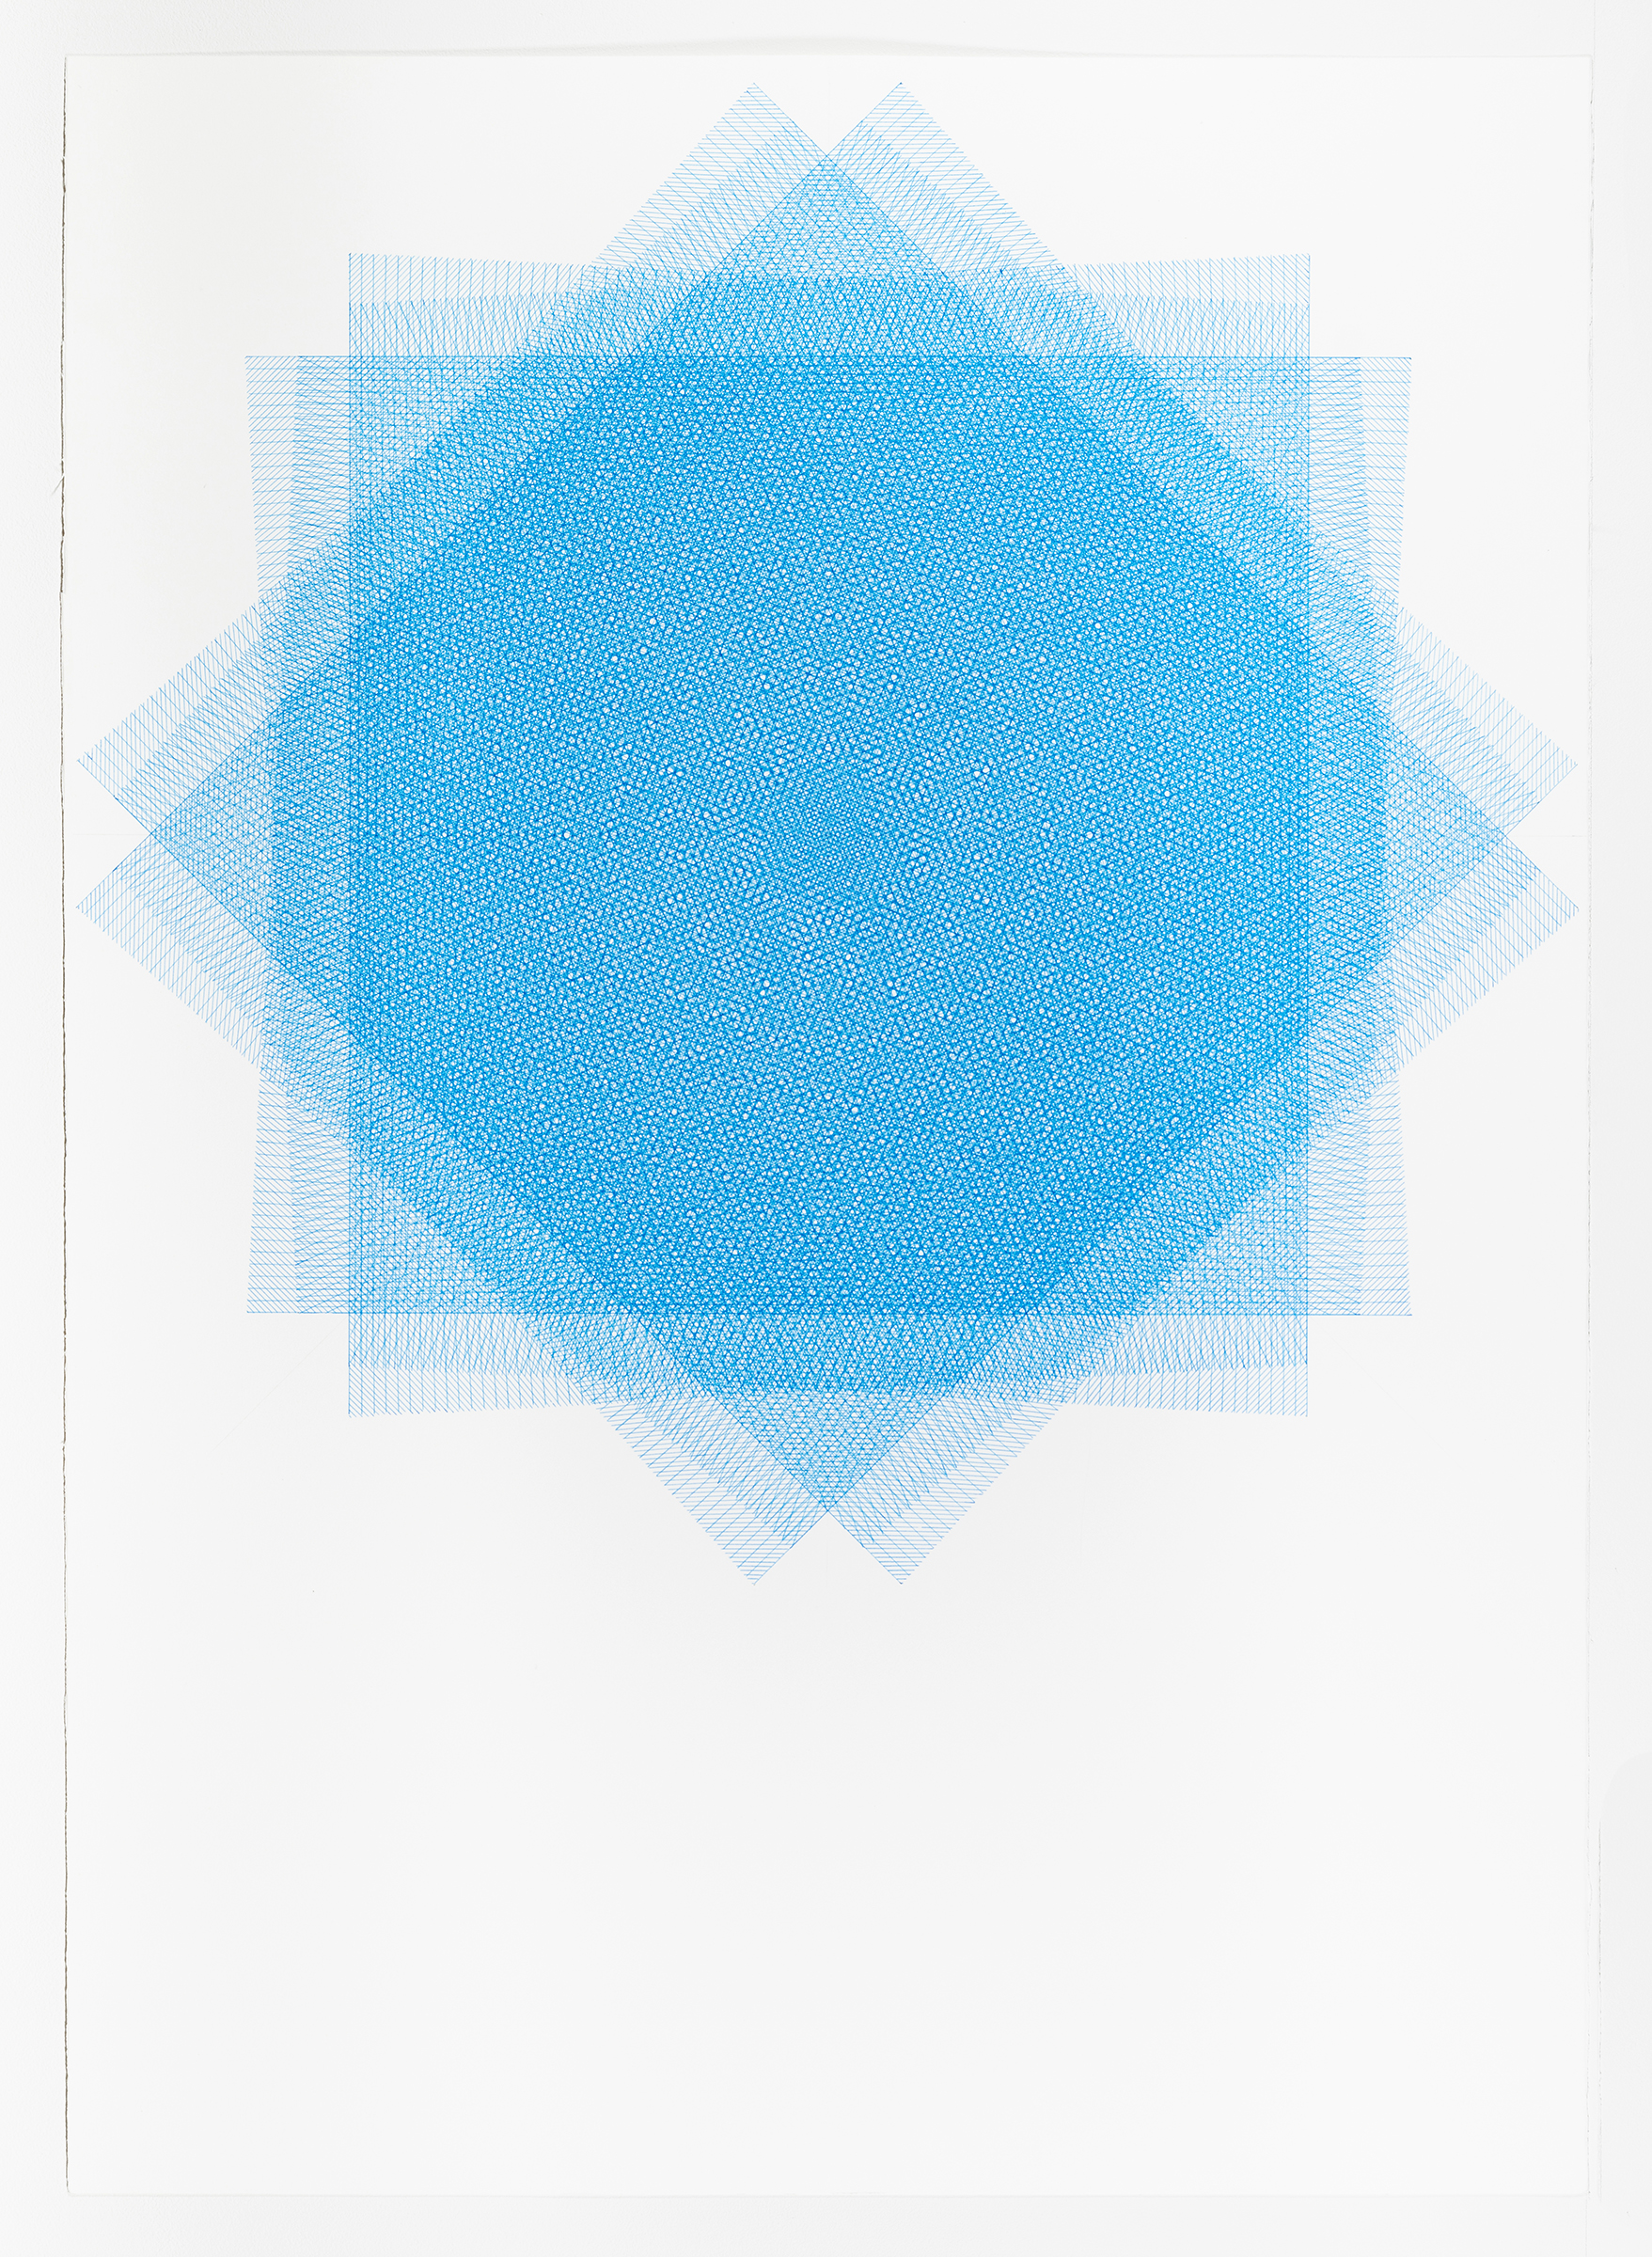 16 layers, blue, 40 x 30 inches, 2015